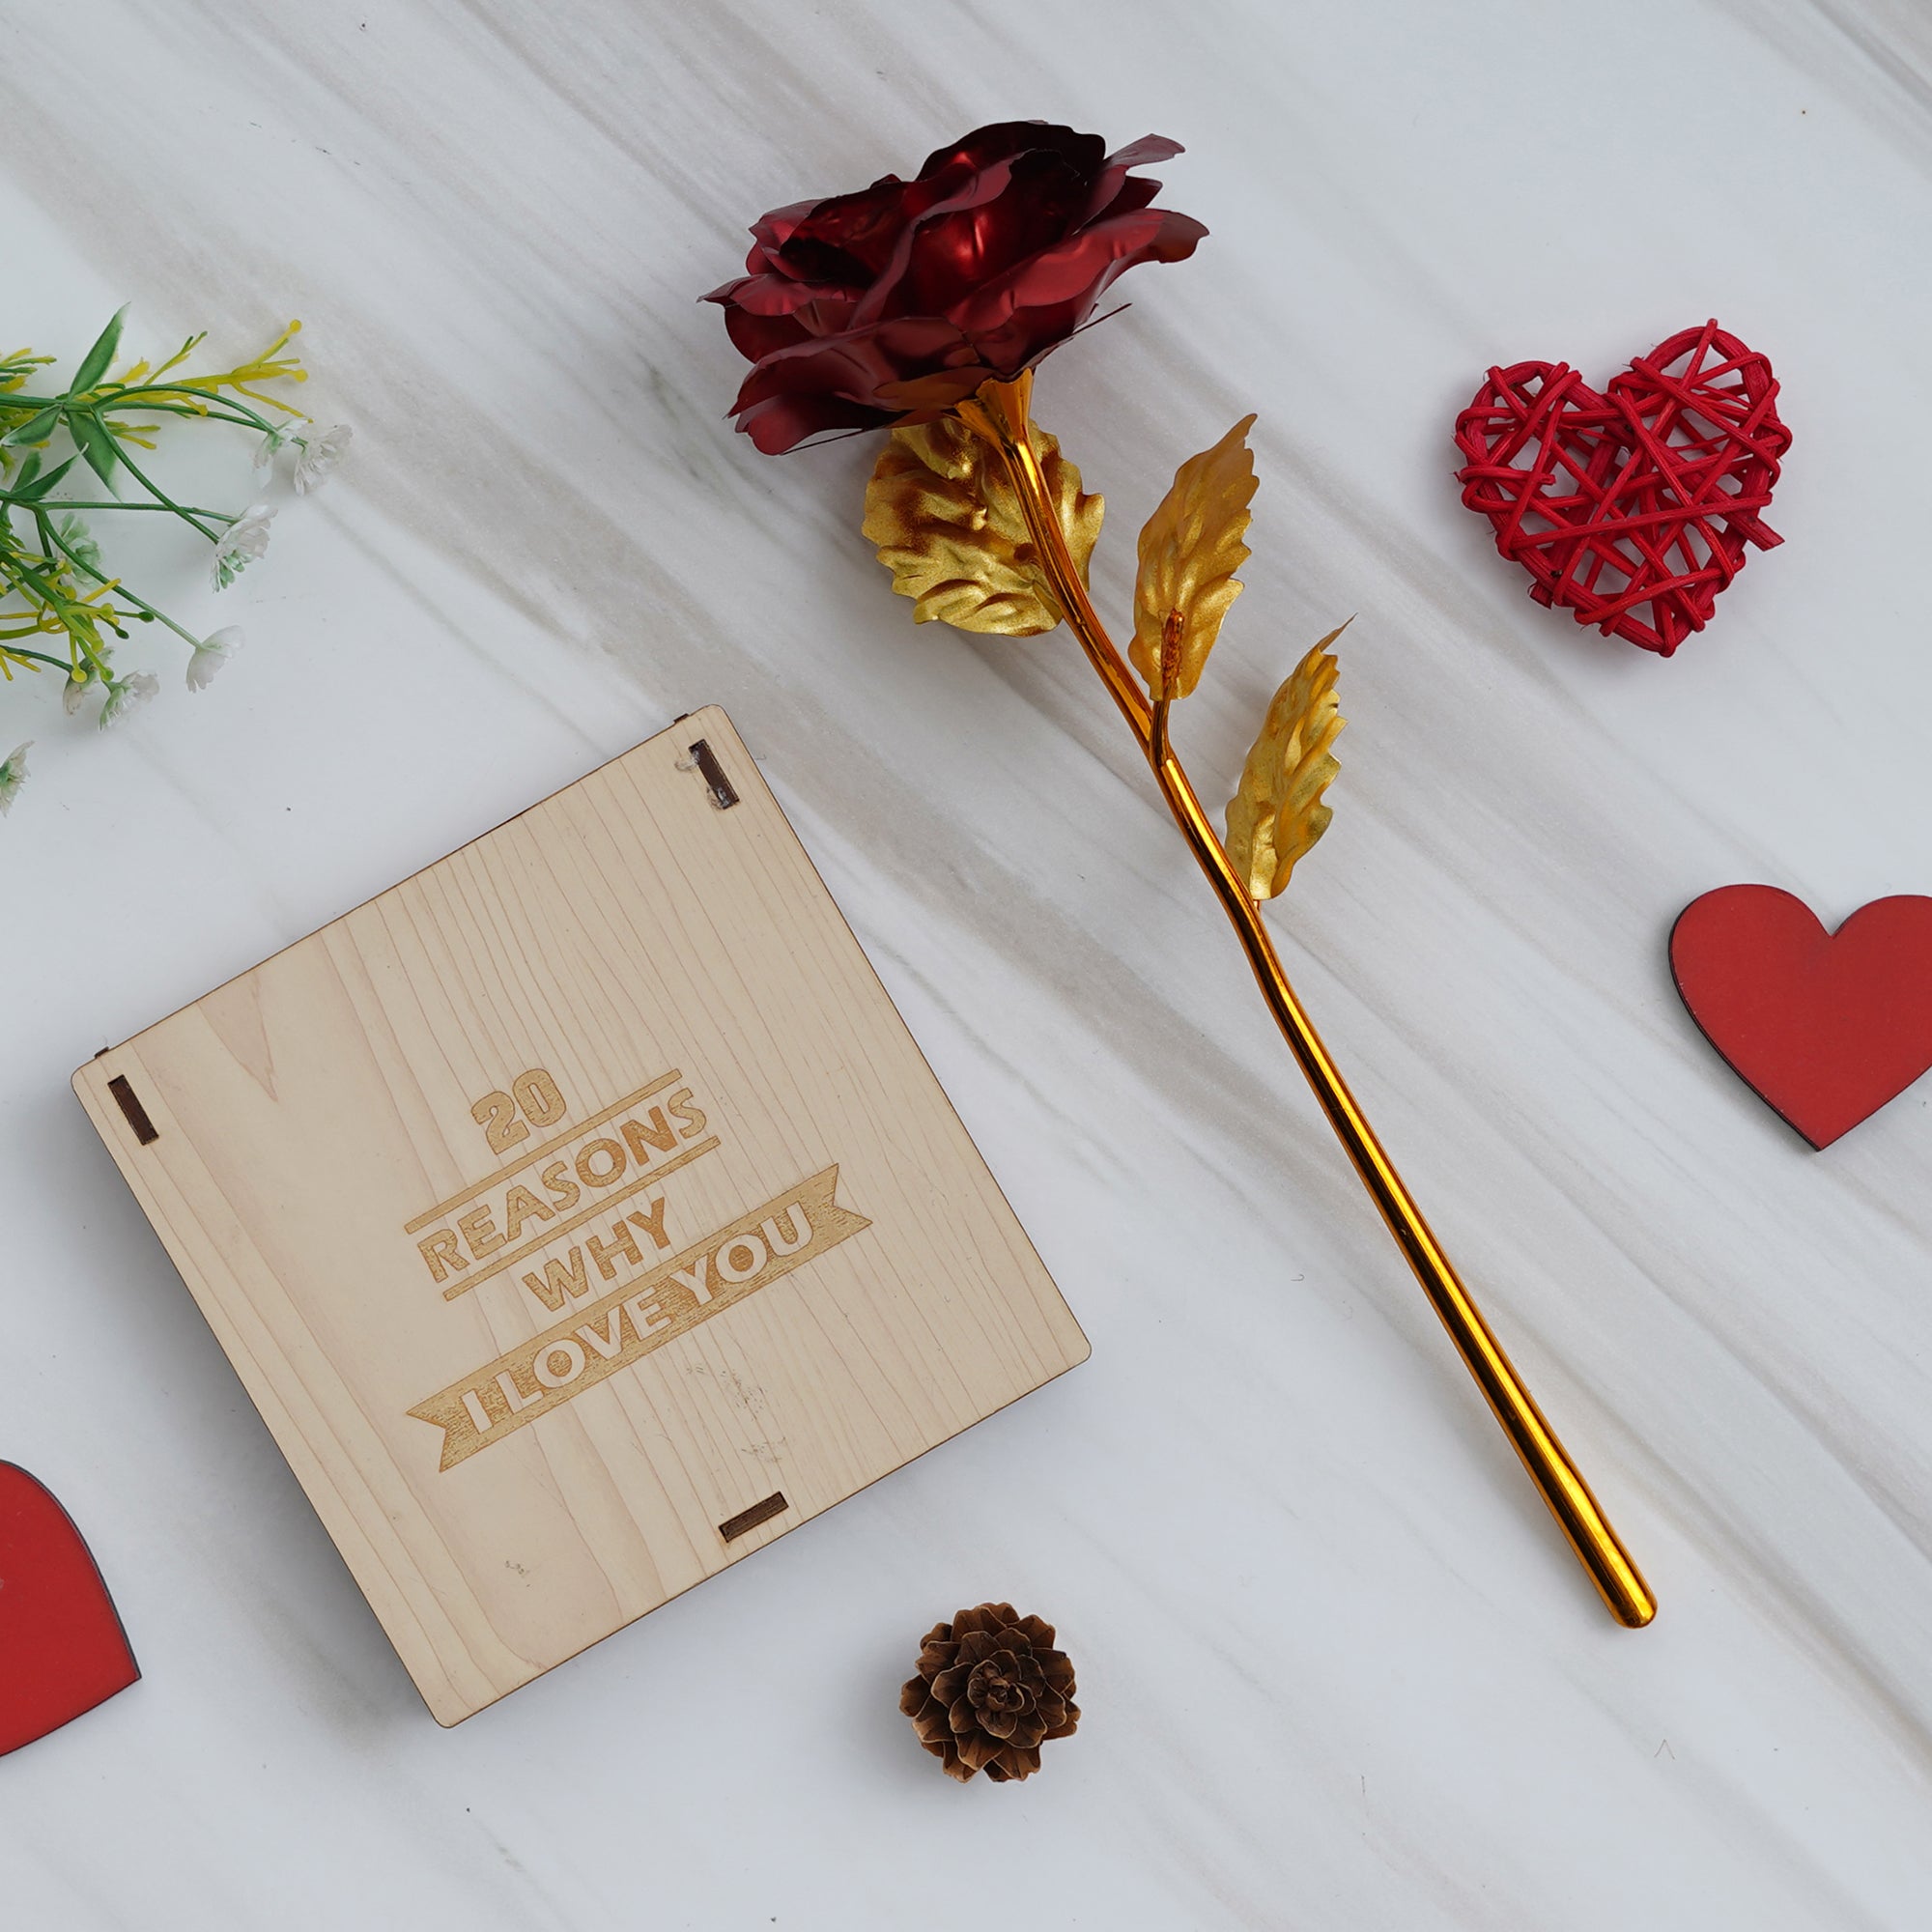 Valentine Combo of Golden Red Rose Gift Set, "20 Reasons Why I Love You" Printed on Little Hearts Wooden Gift Set